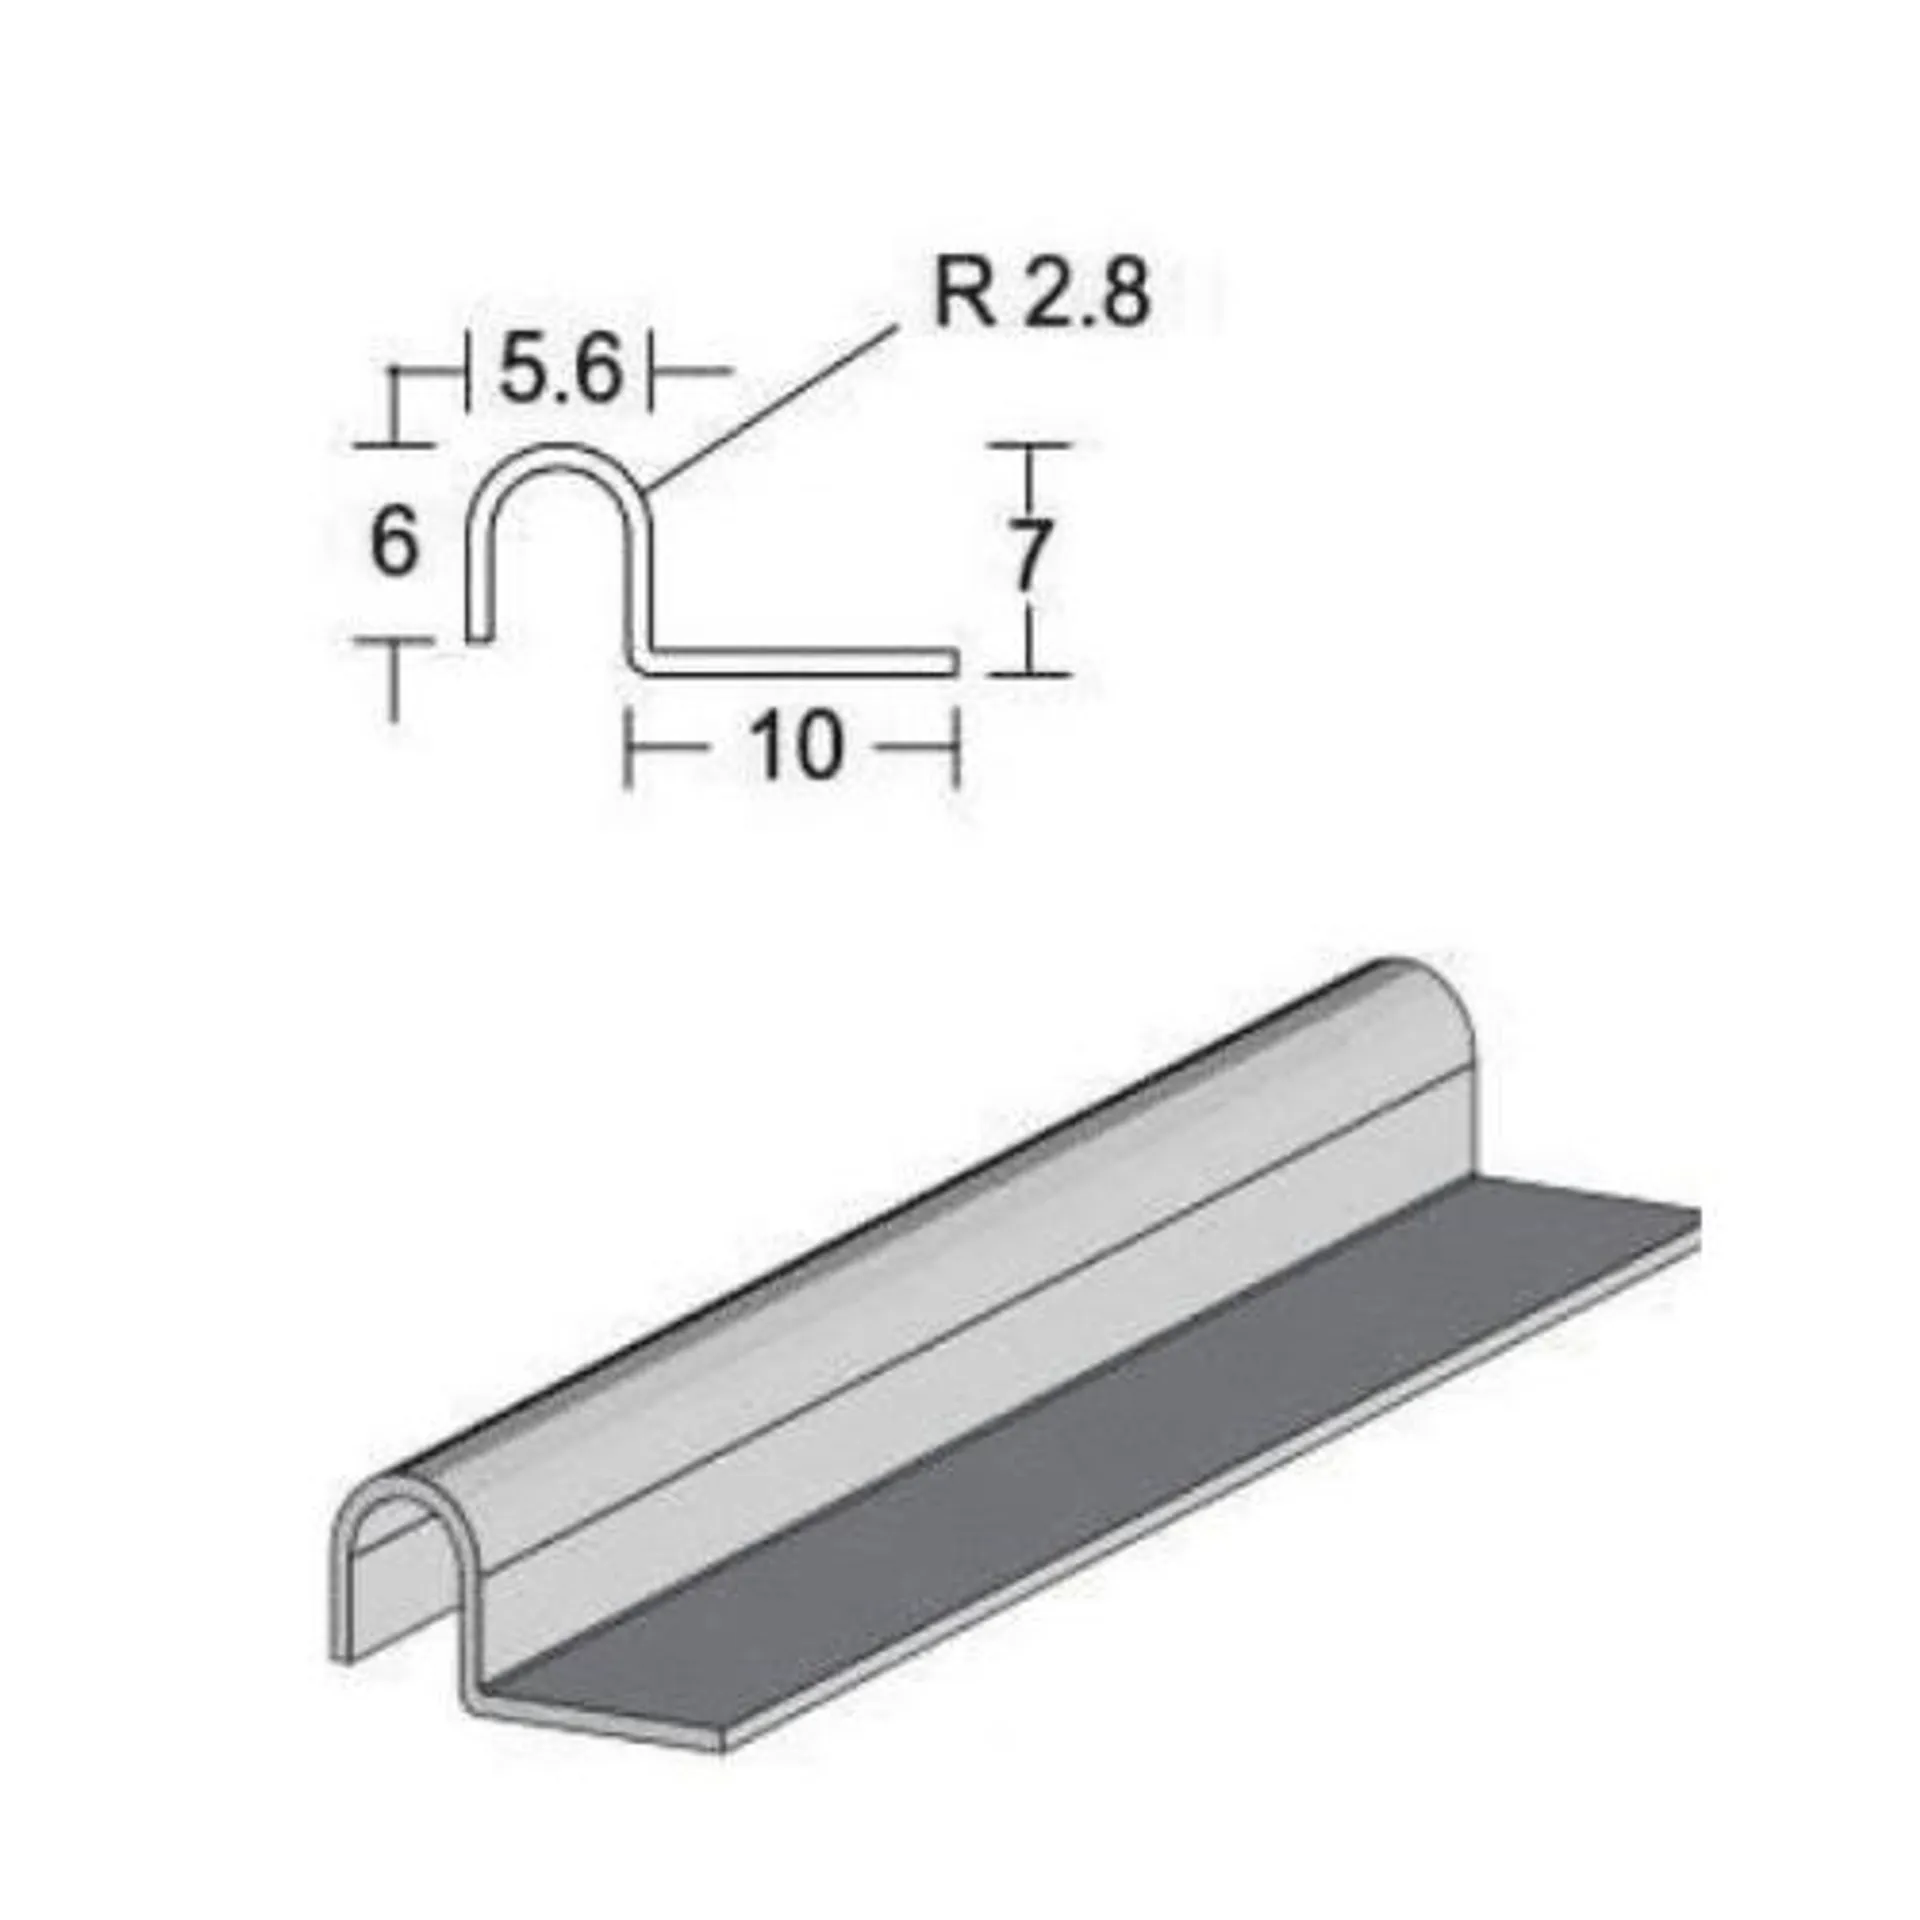 5.6mm Diameter Track Capping – 7mm